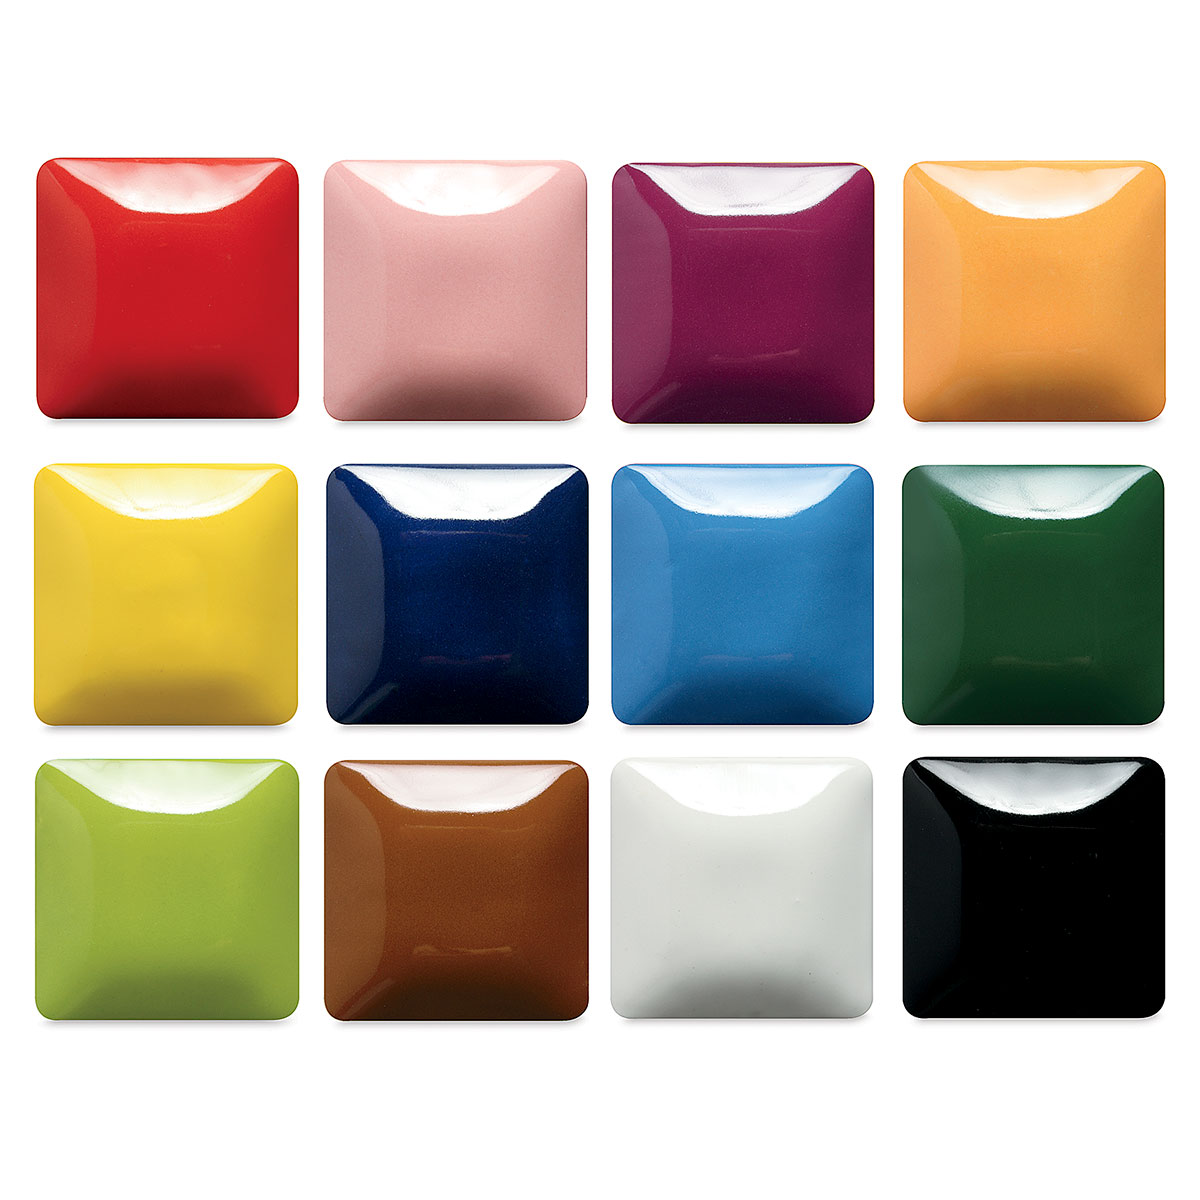 Mayco Stroke and Coat Wonderglaze for Bisque Set #3 - Set of 12 Assorted Colors